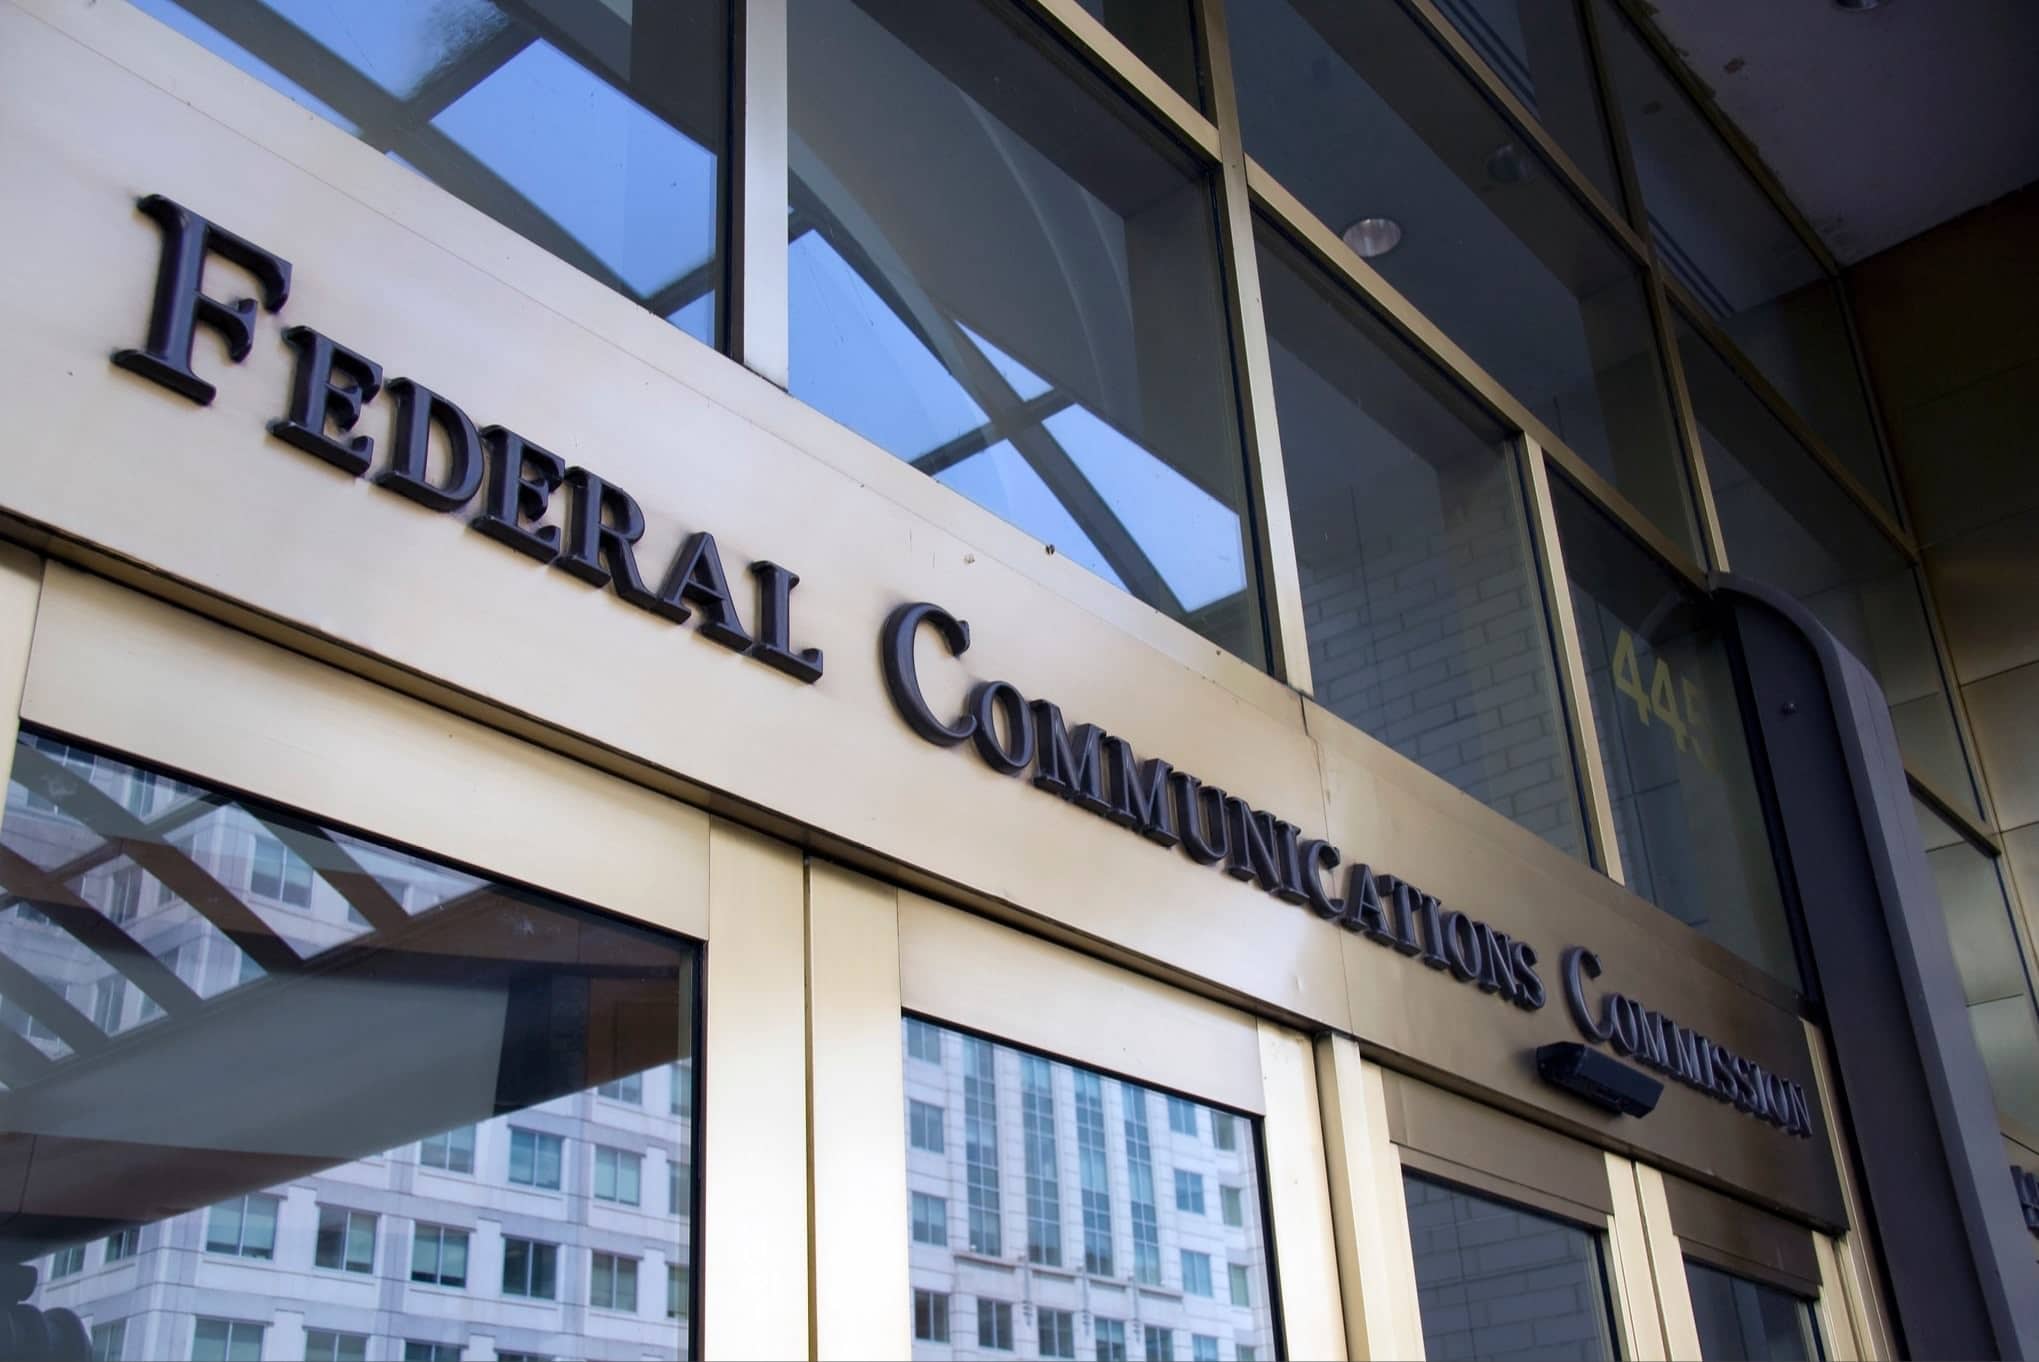 Exterior of the FCC Building